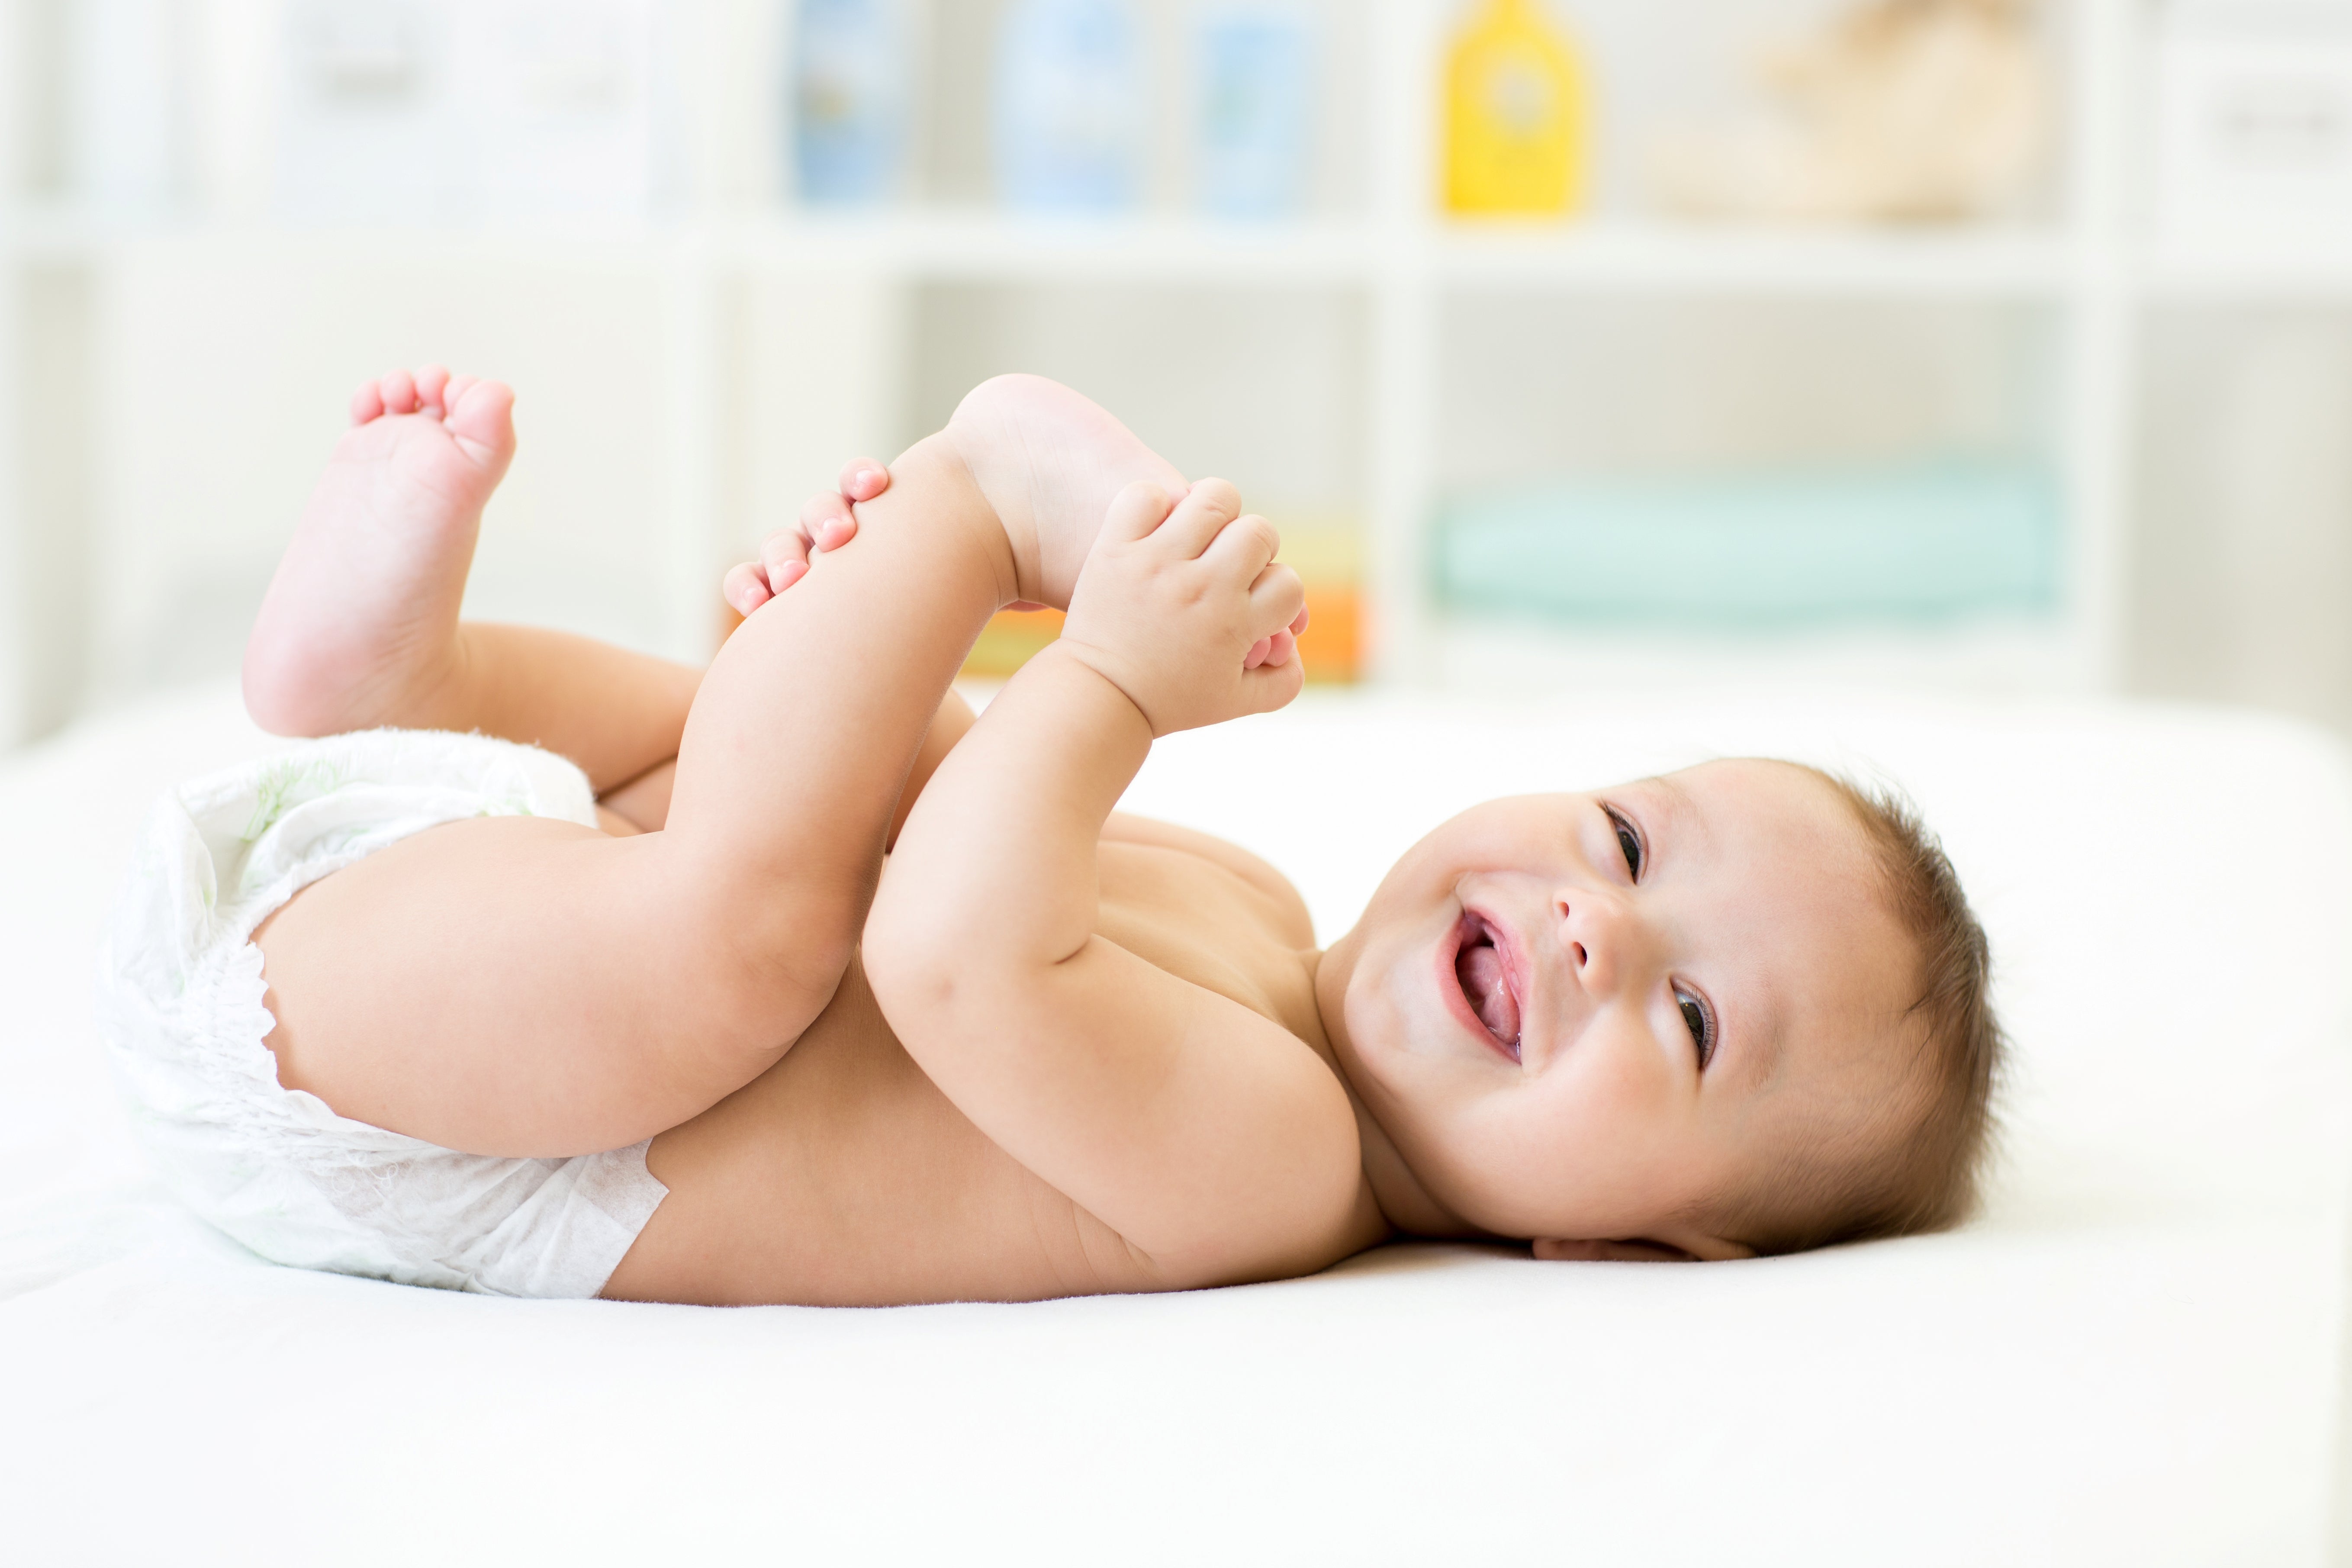 Wholesale Baby Diapers: Best Quality and Savings